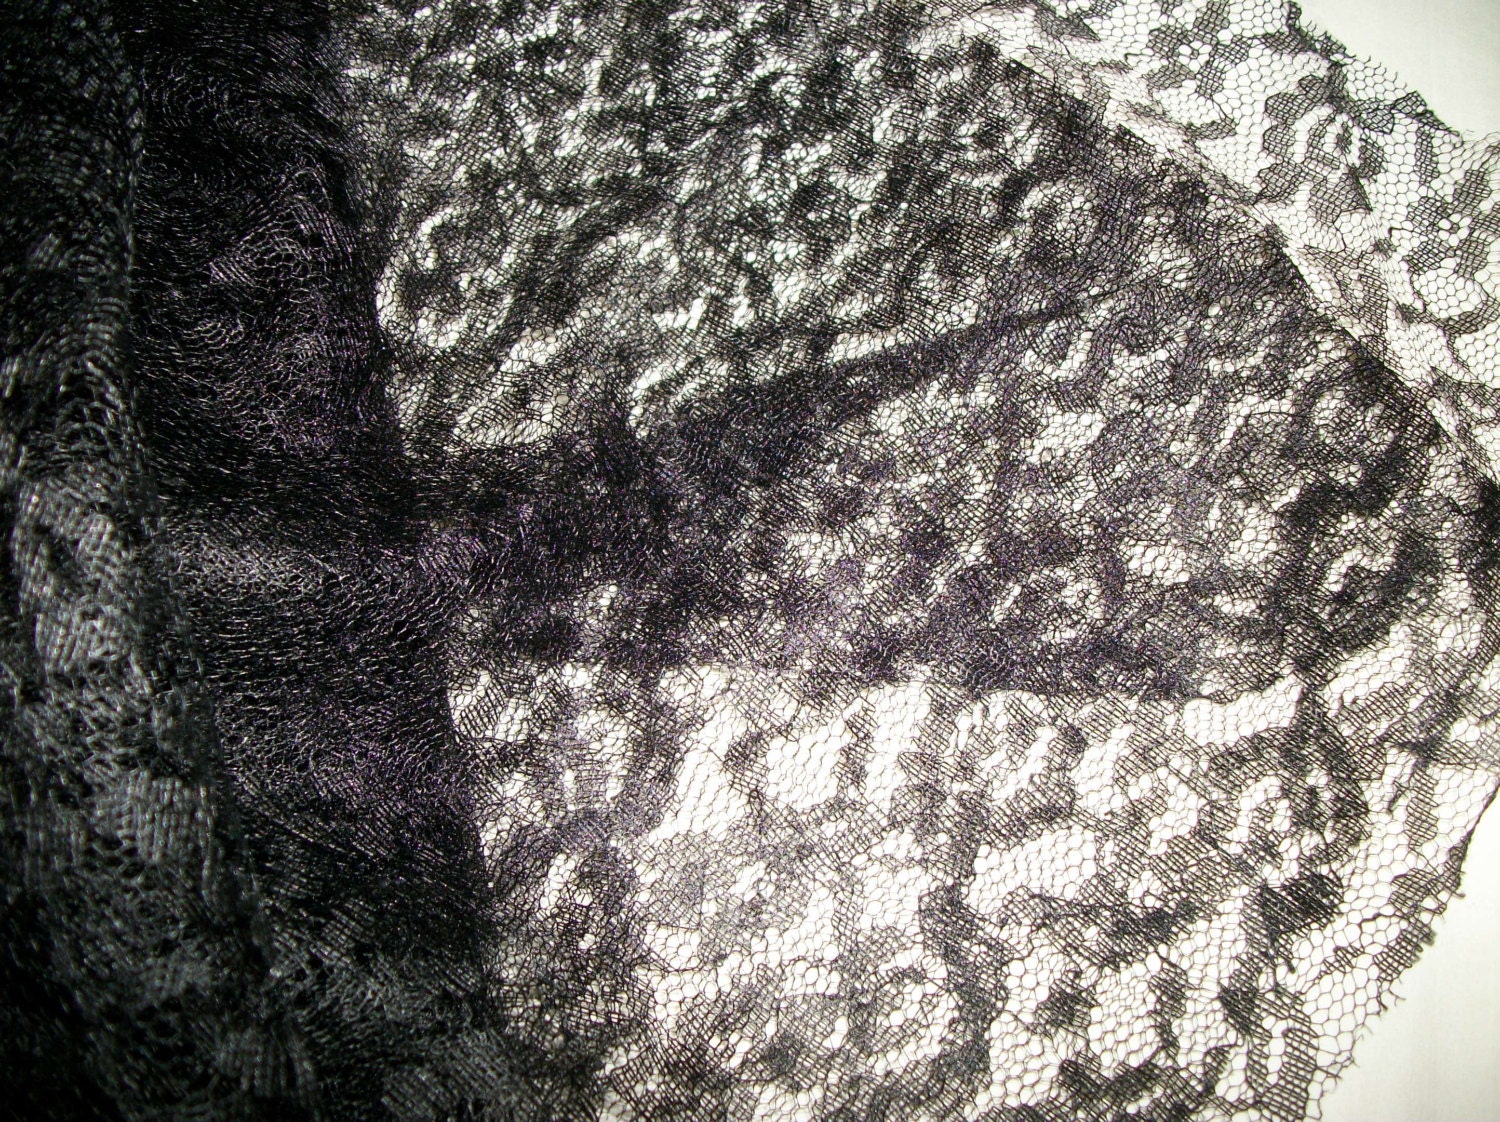 Black Stylized Floral Lace Fabric